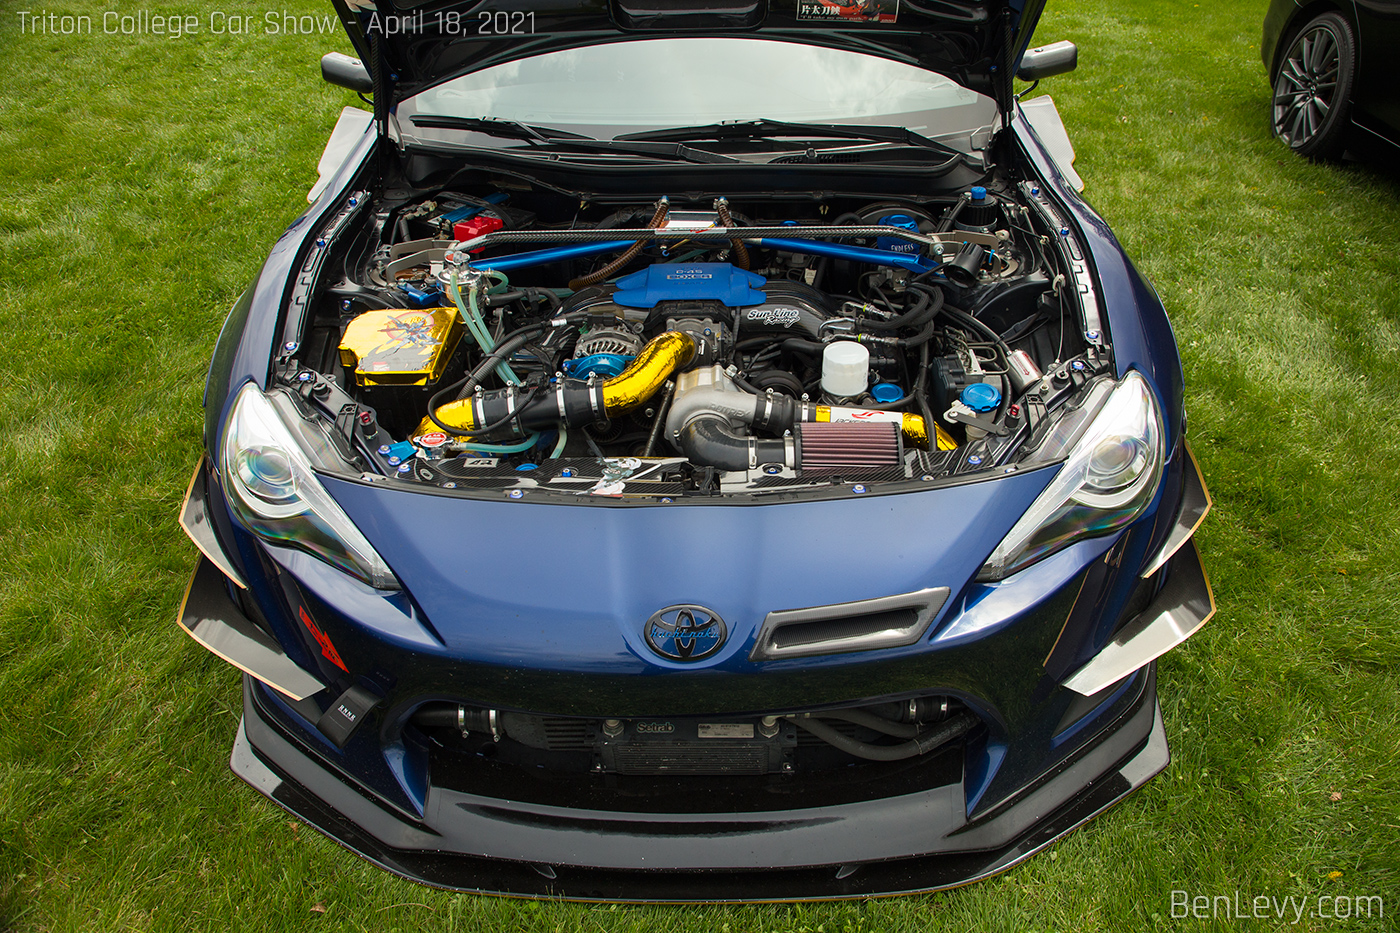 Open Hood of Supercharged Scion FR-S